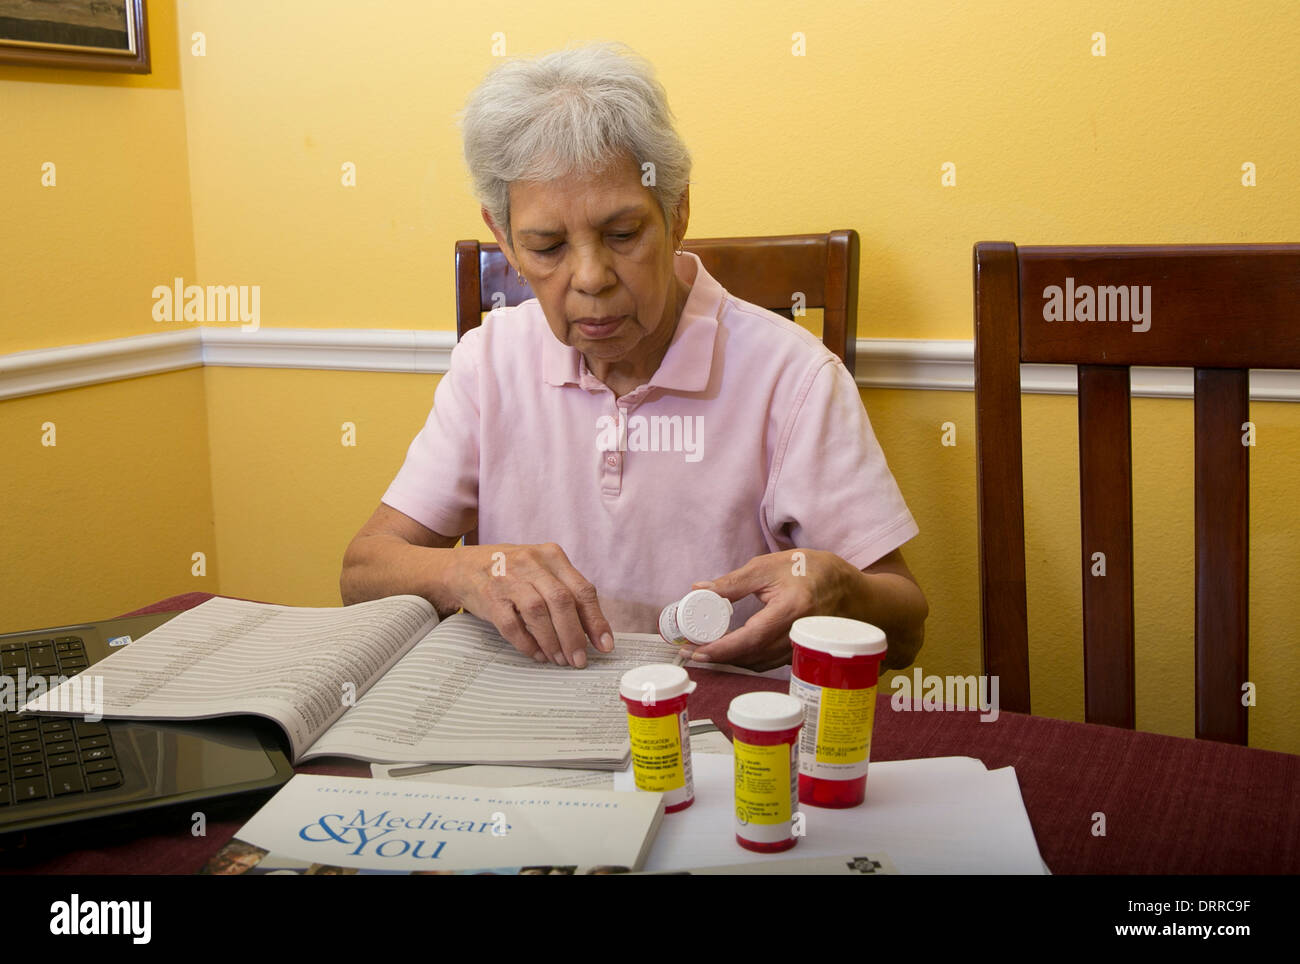 Hispanic 75 year old senior citizen woman reads Medicare booklet pamphlet and looks up her prescription medications Stock Photo